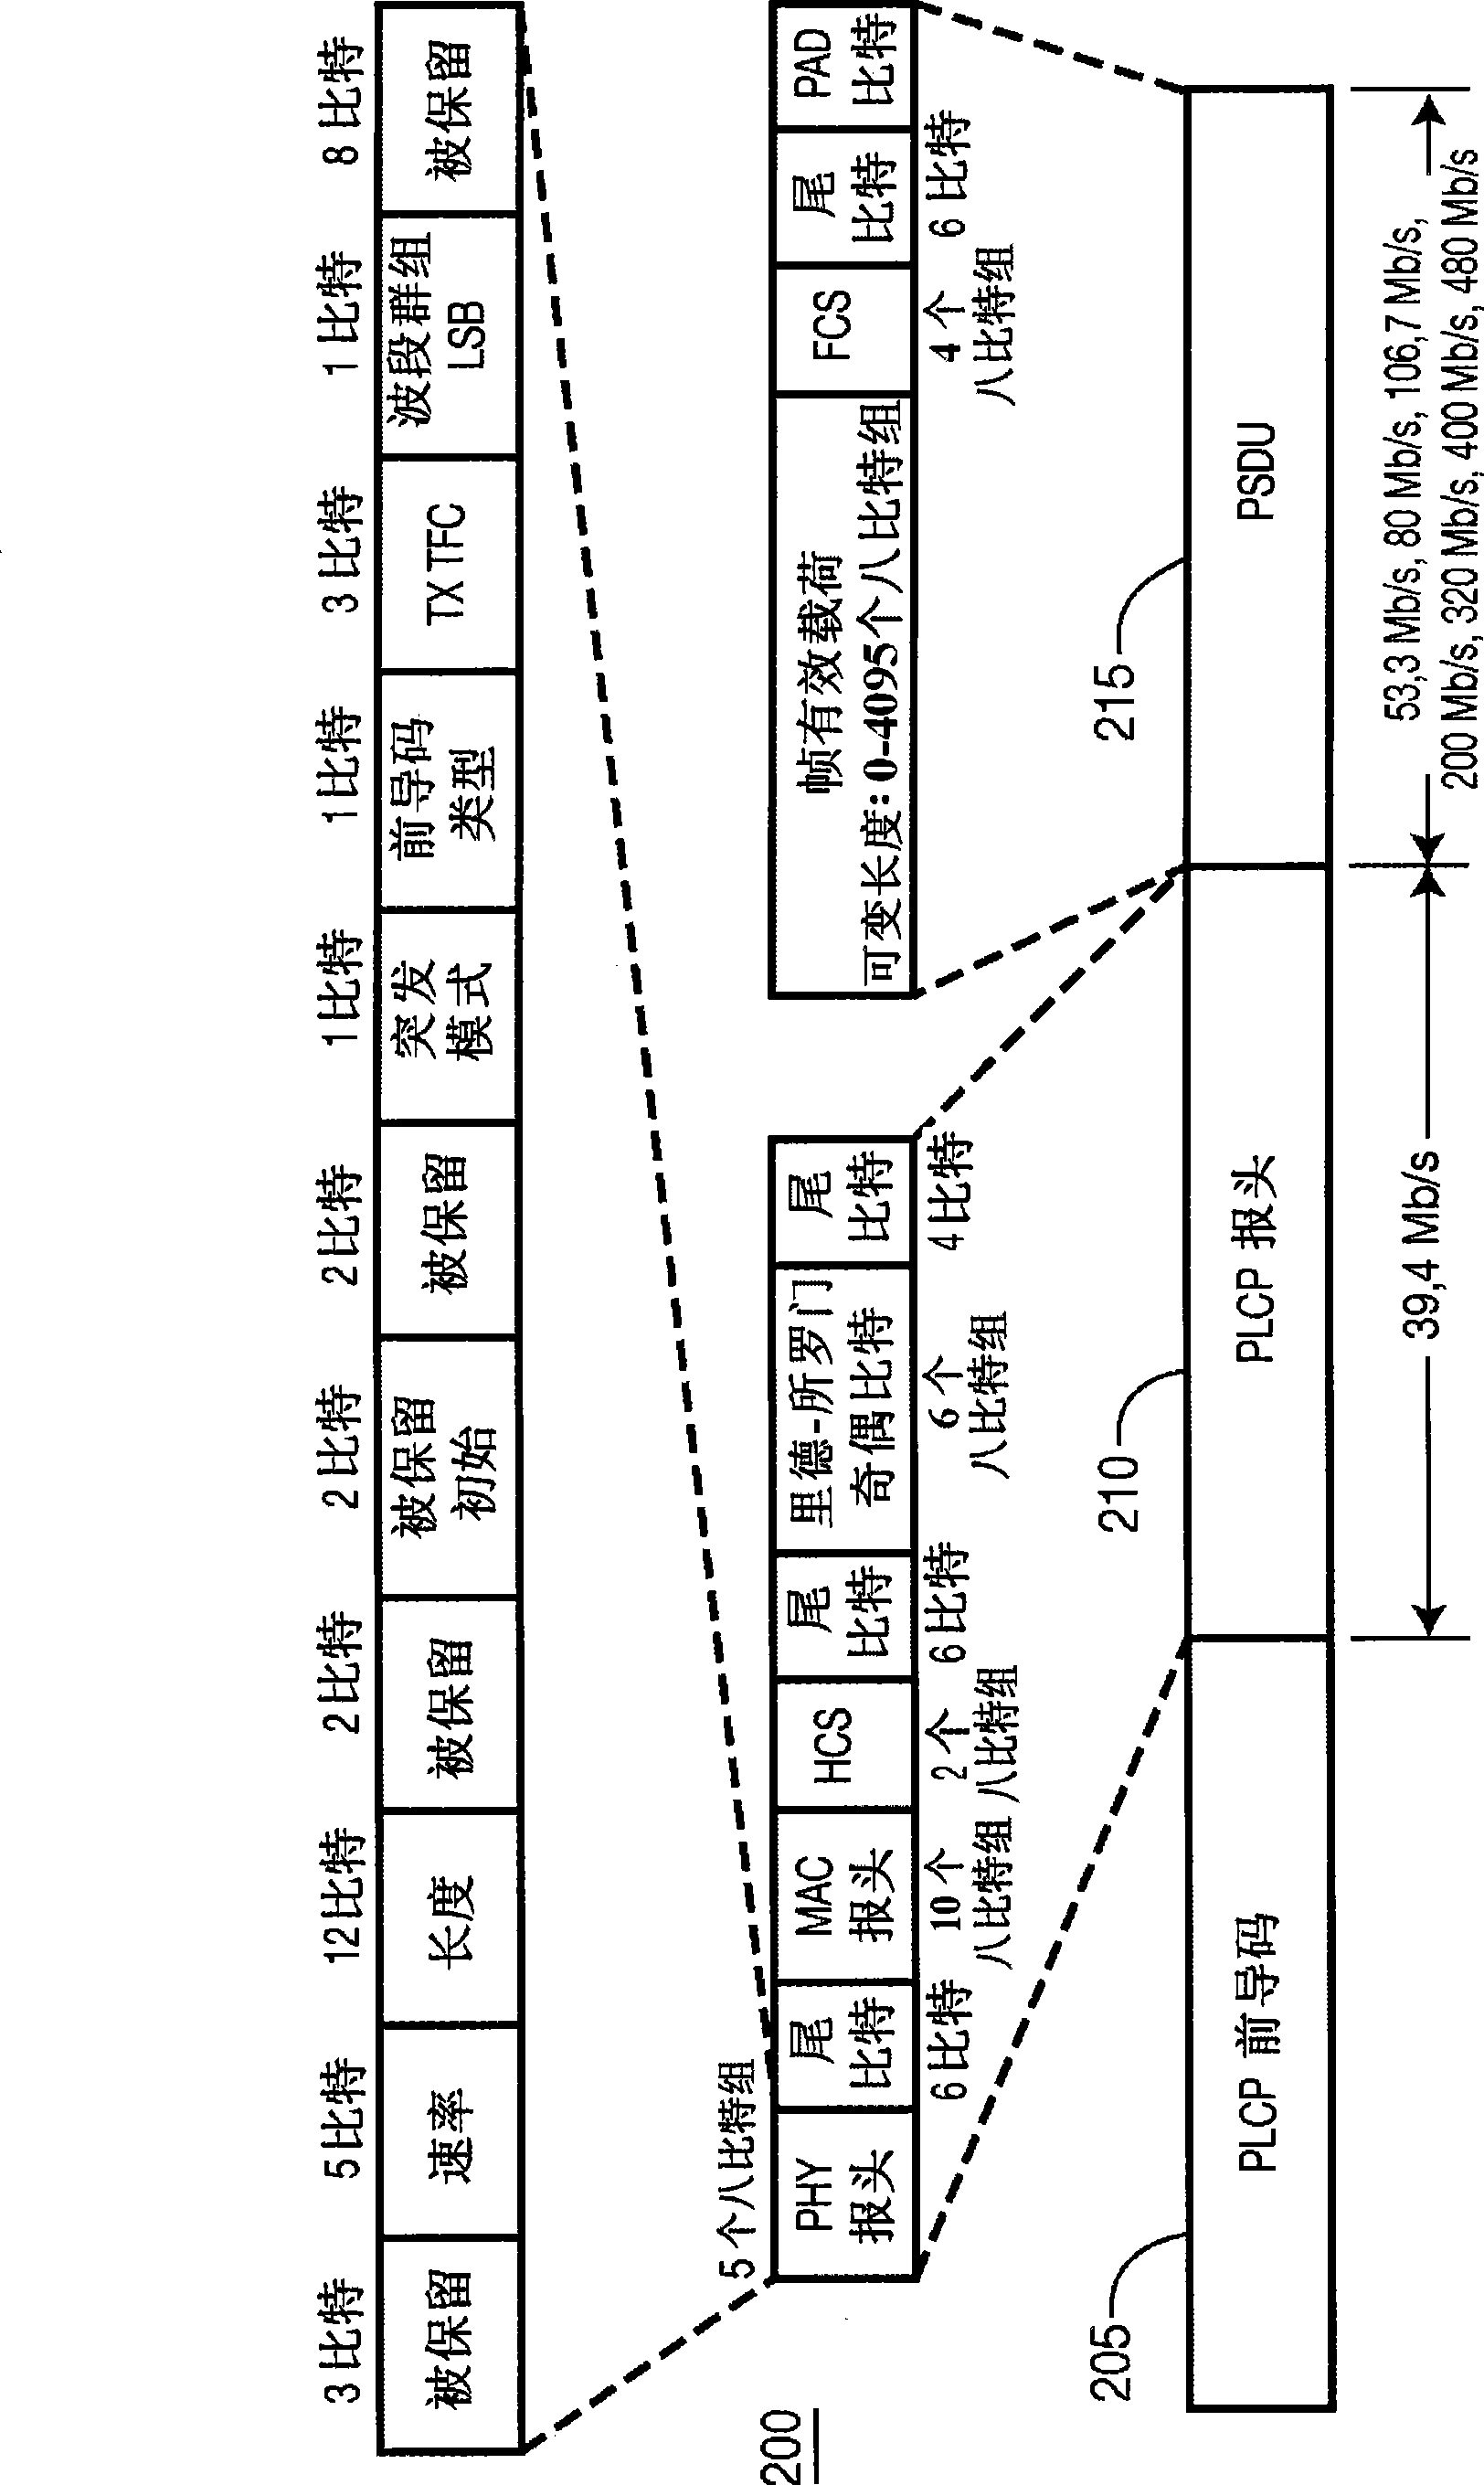 Wireless communication method and apparatus for allocating training signals and information bits